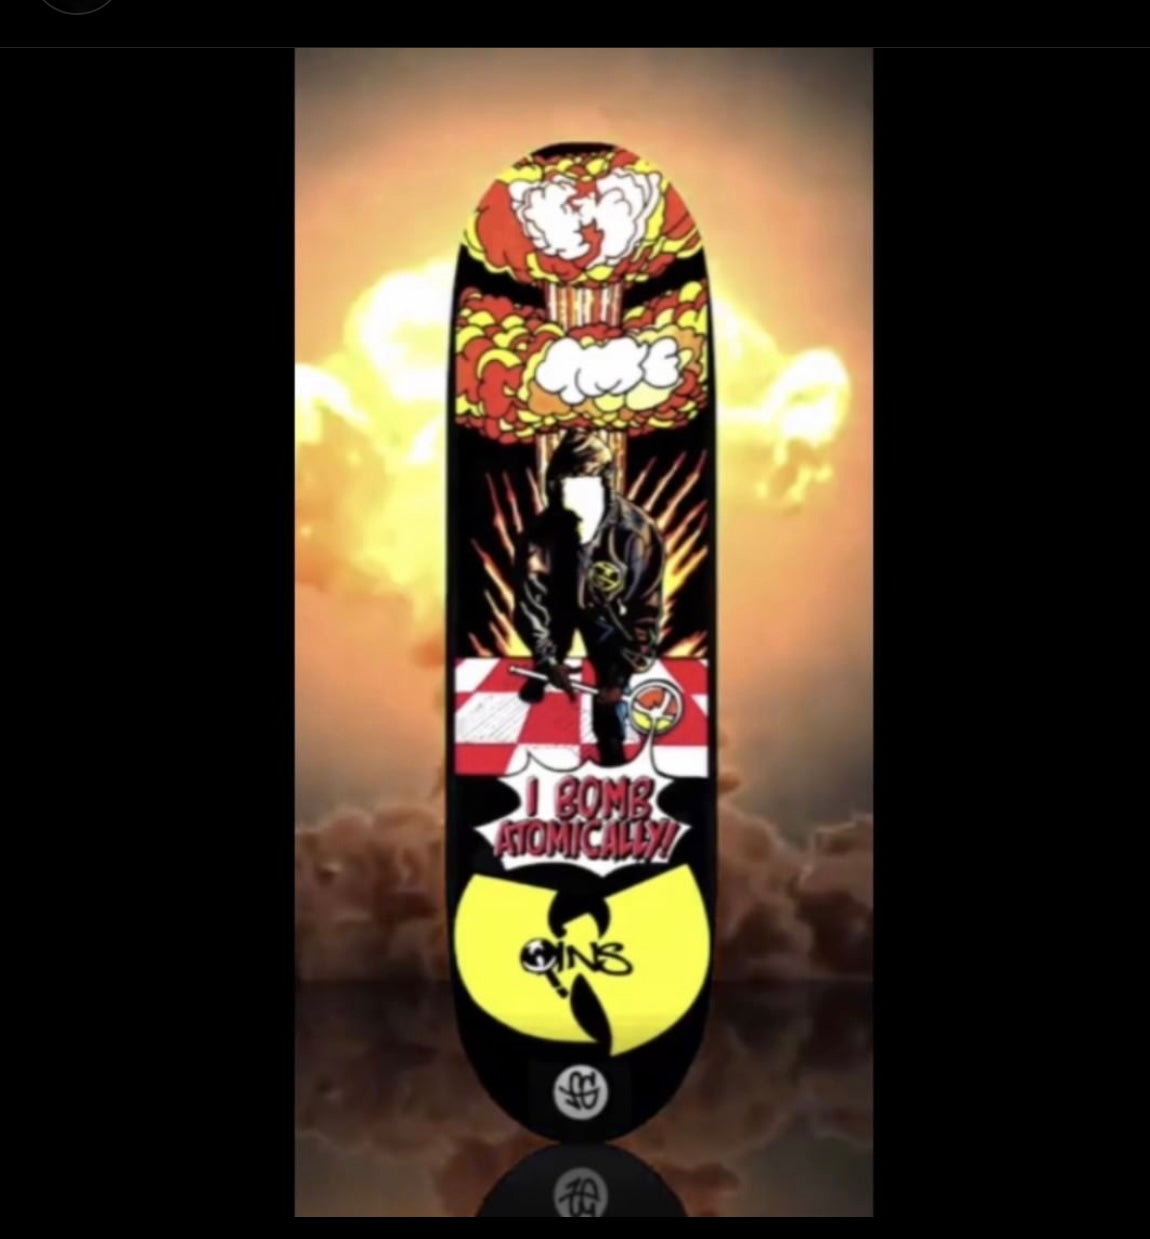 LIMITED EDITION* AUTOGRAPHED “I BOMB ATOMICALLY” SKATEBOARD.